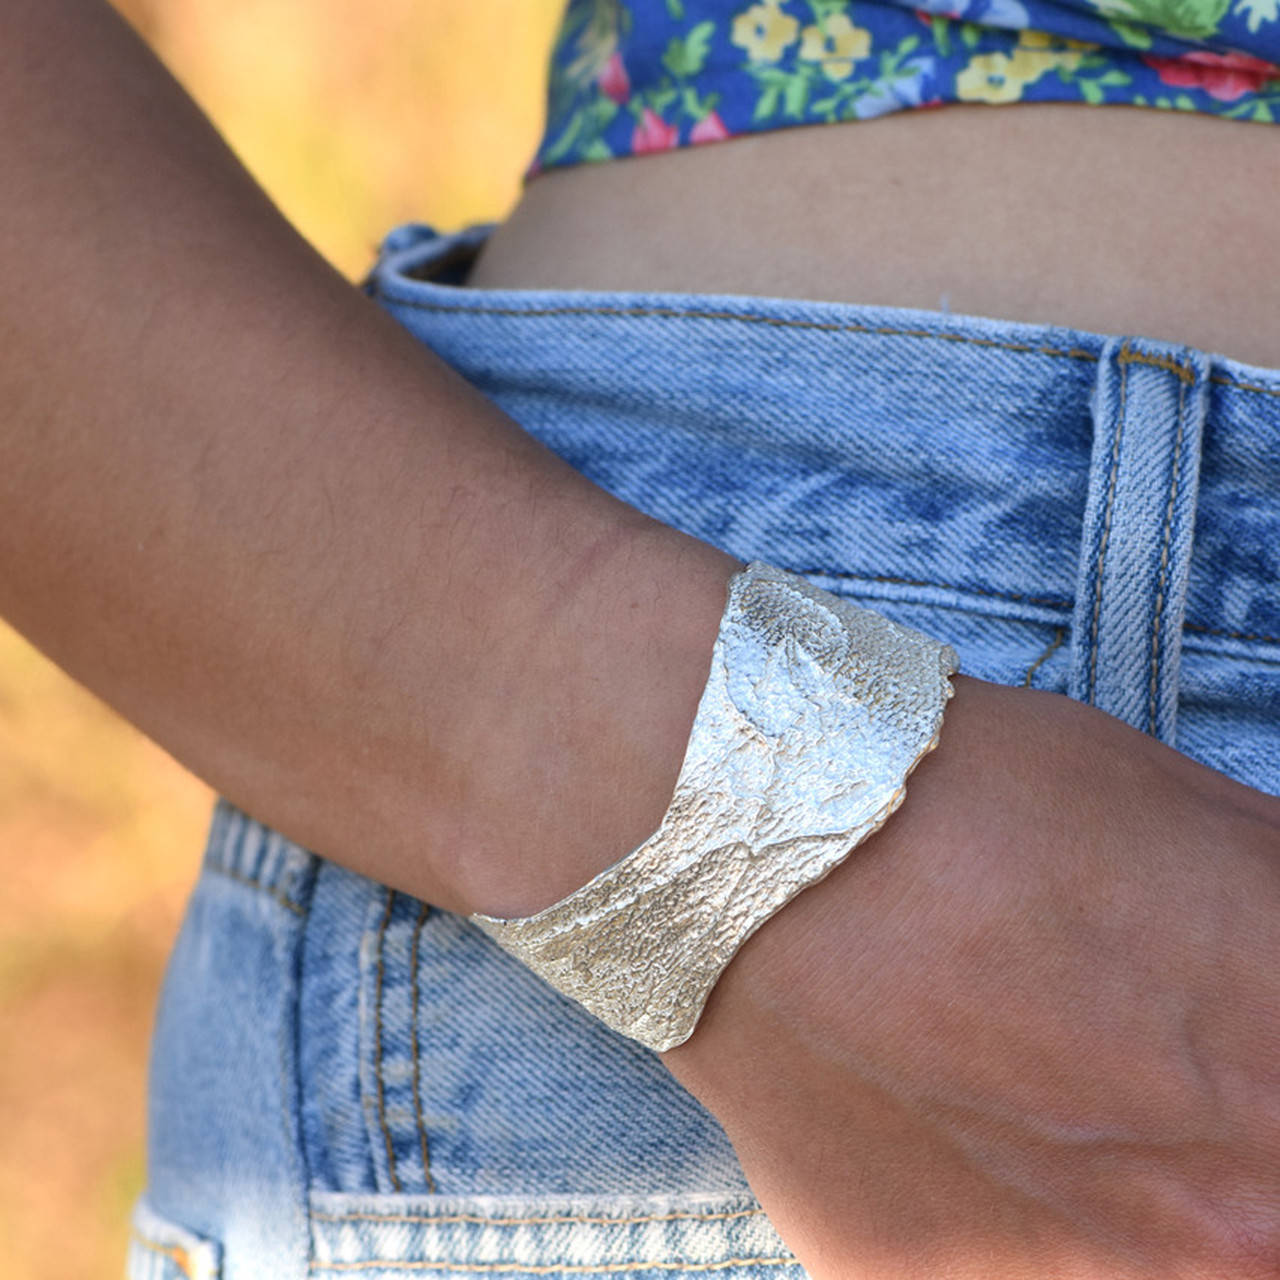 Issy White: London Plane Cuff in Silver, tomfoolery